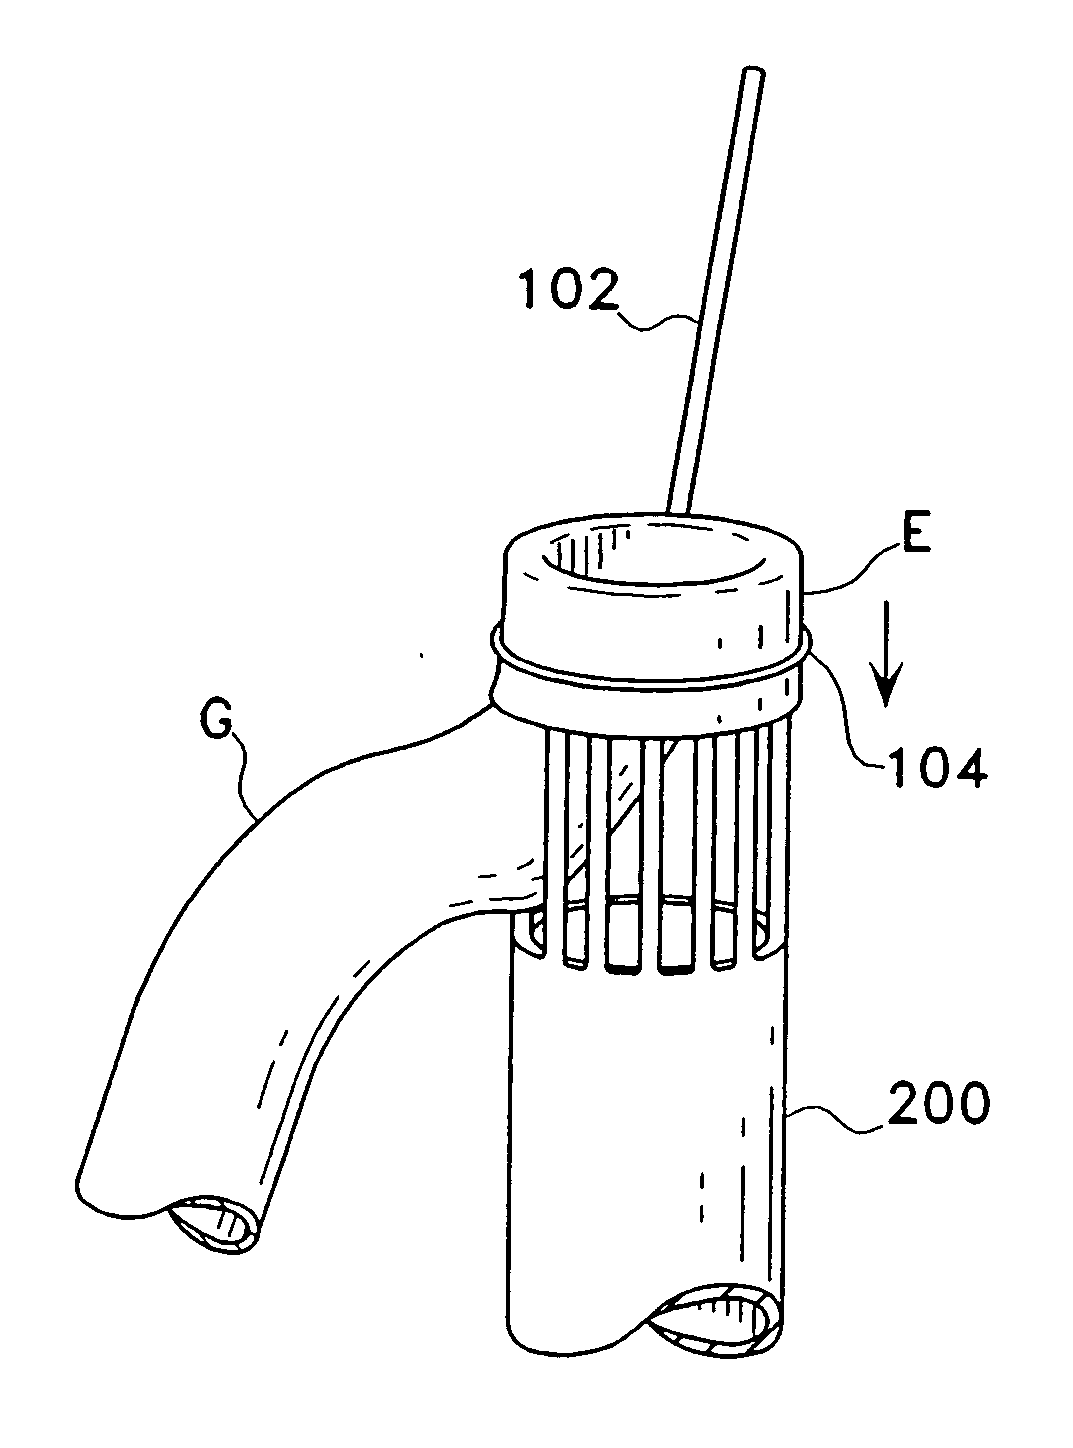 Eversion apparatus and methods